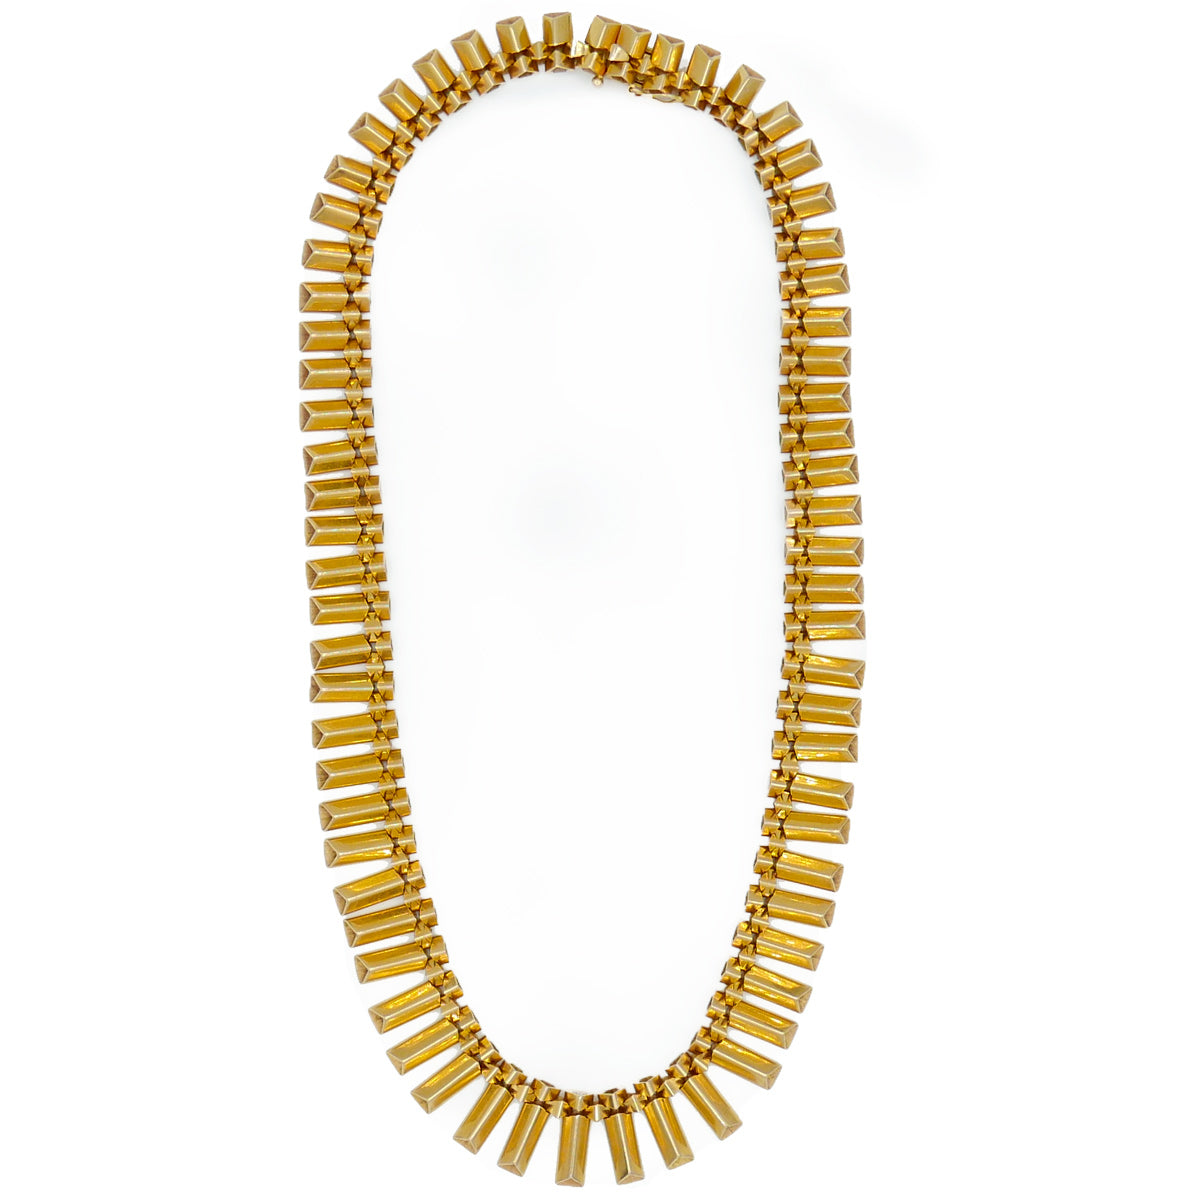 RETRO FRENCH 18K YELLOW GOLD NECKLACE c.1940s